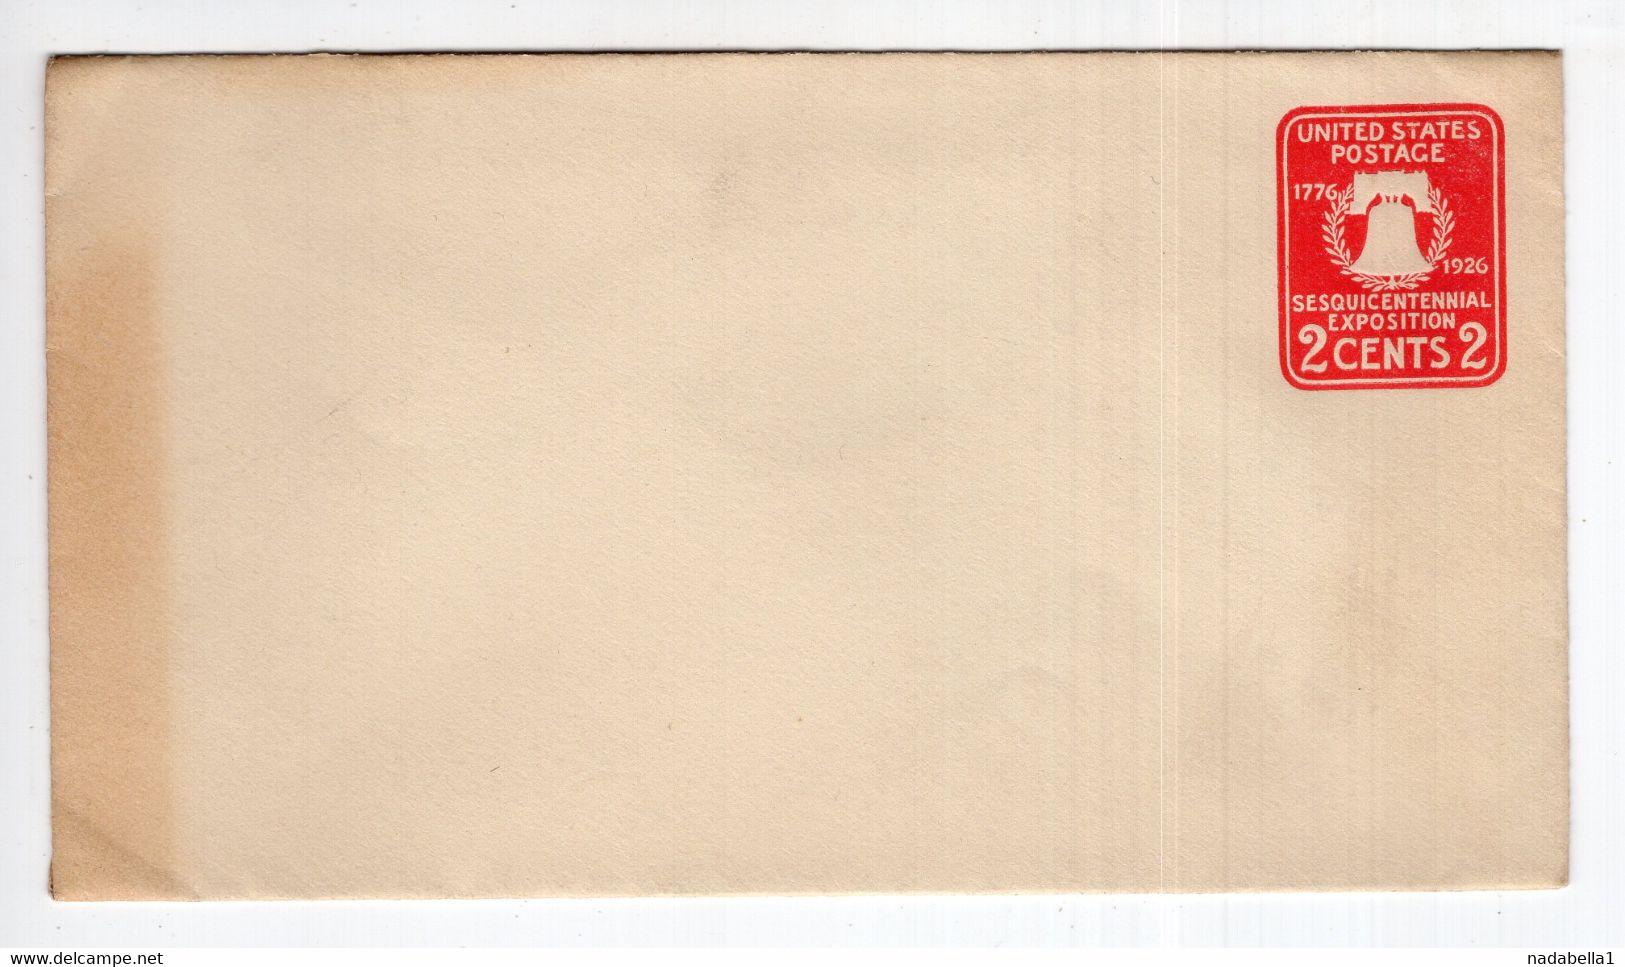 1926. UNITED STATES,2 CENTS STATIONERY STAMPED COVER,MINT - 1921-40